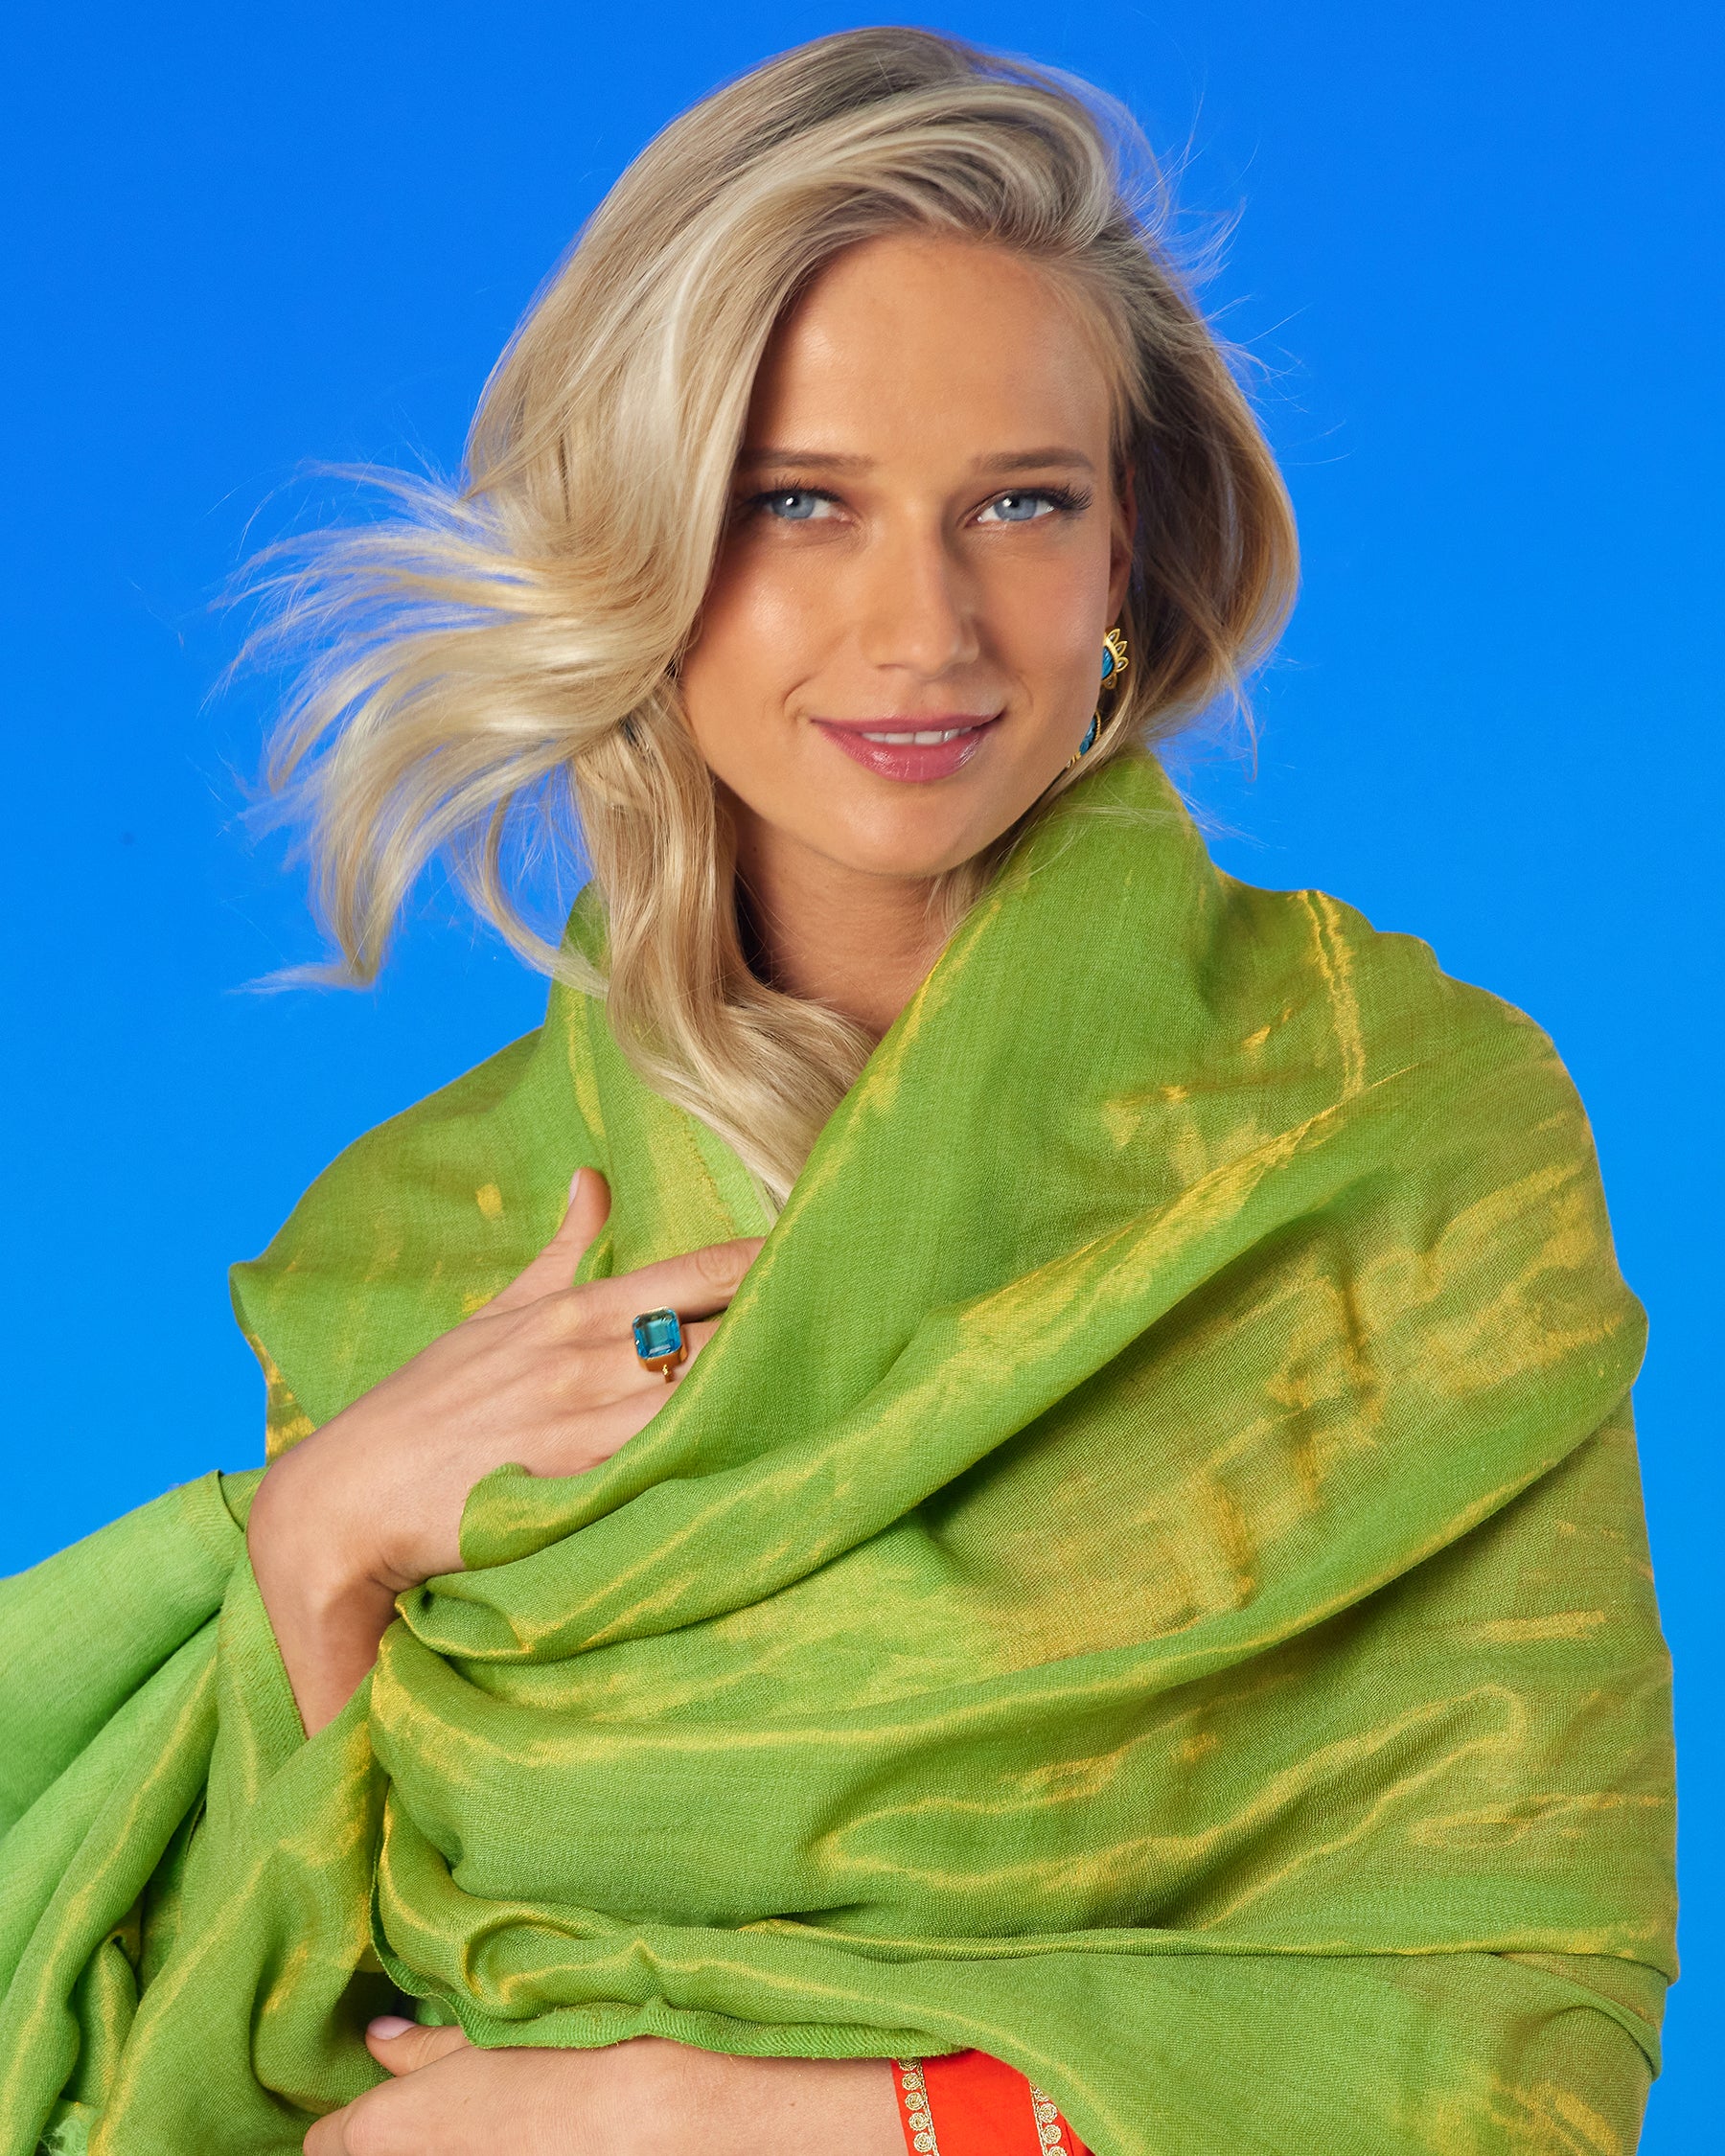 Josephine Reversible Pashmina Shawl in Gold Shimmer Lime wrapped in a cocoon to show how soft it is